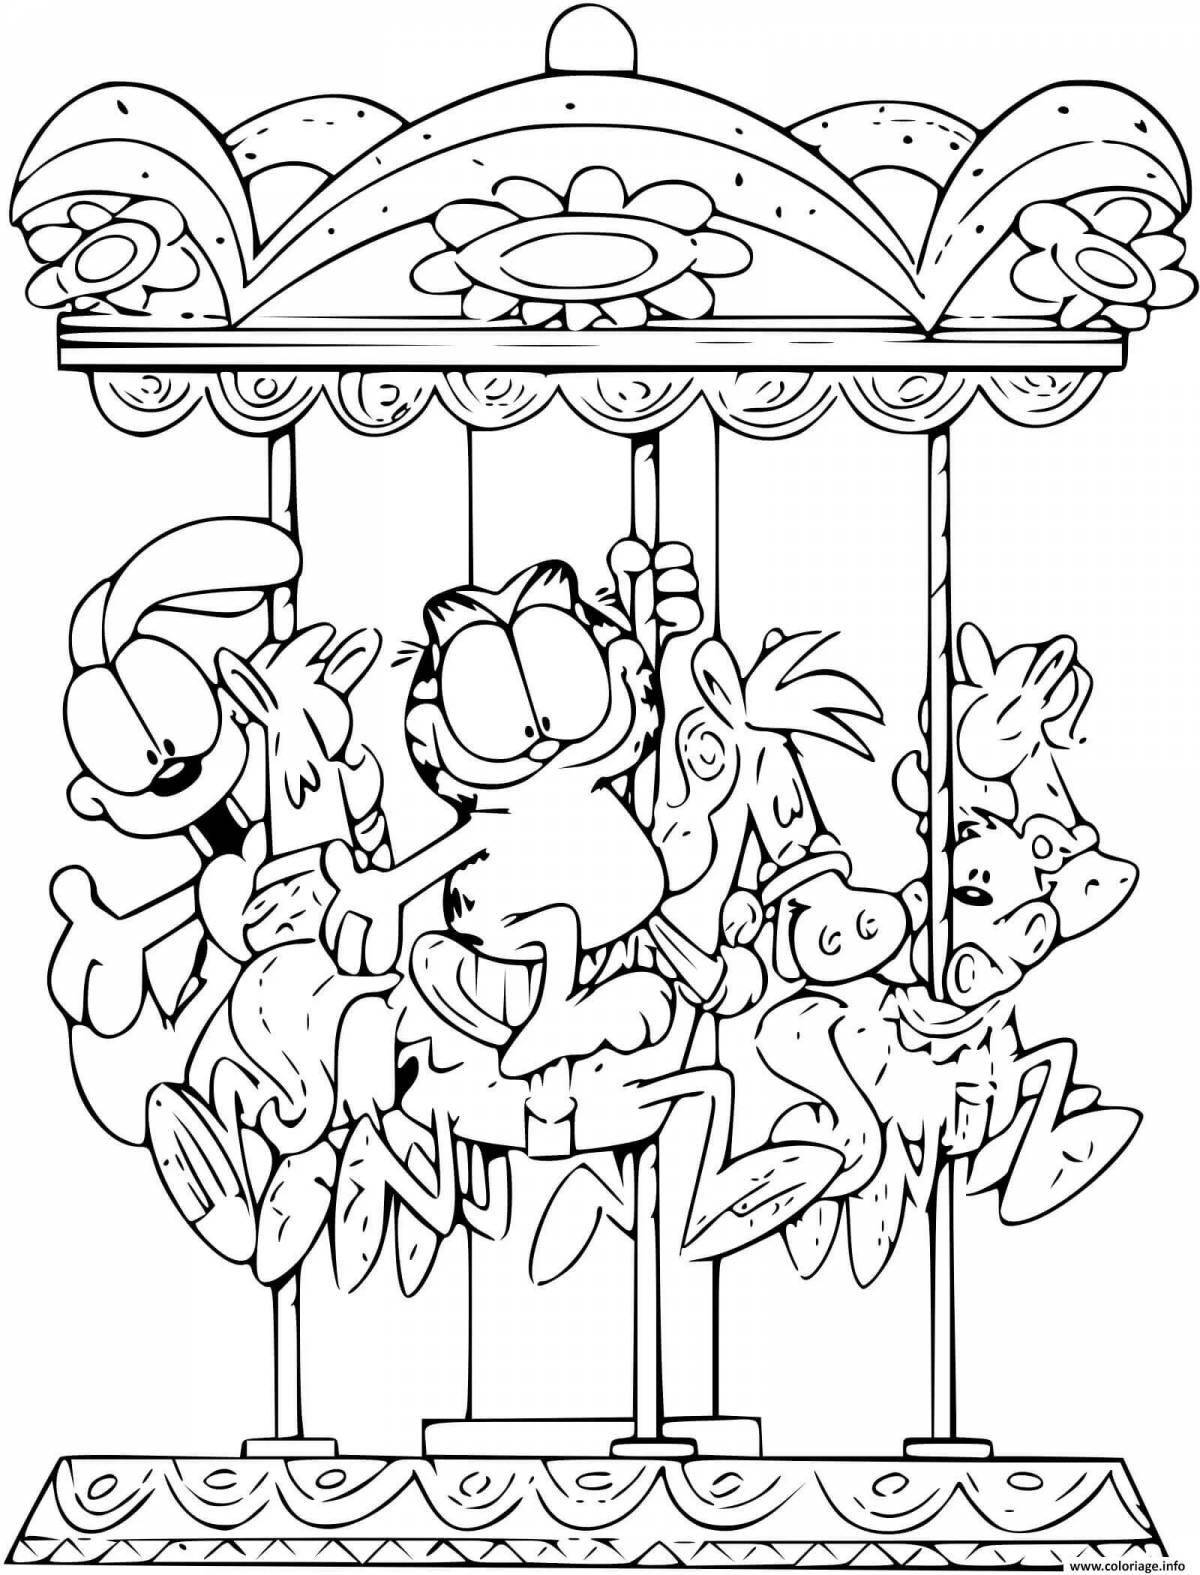 Wonderful carousel coloring for toddlers